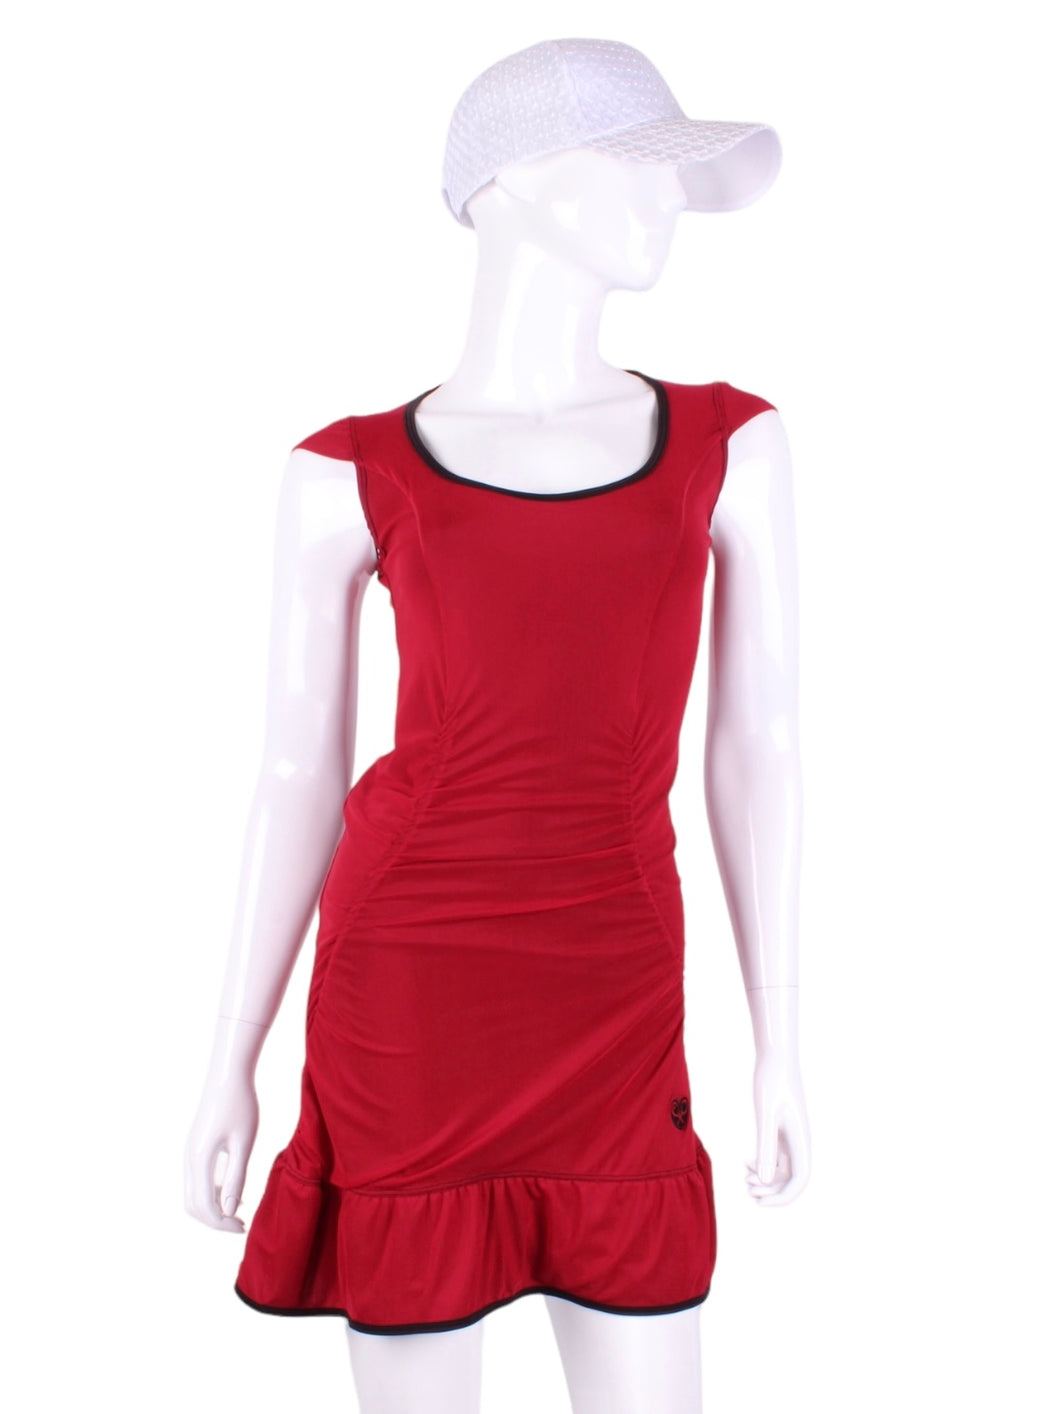 The Monroe Dress offers a little more coverage around the chest and the arms, but delicately shows your feminine curves. Our dress is fitted, and flares out at the skirt. It is perfect for tennis, running and golf, and of course, a trip to your after-court party with your friends. It was designed for confident women like you!